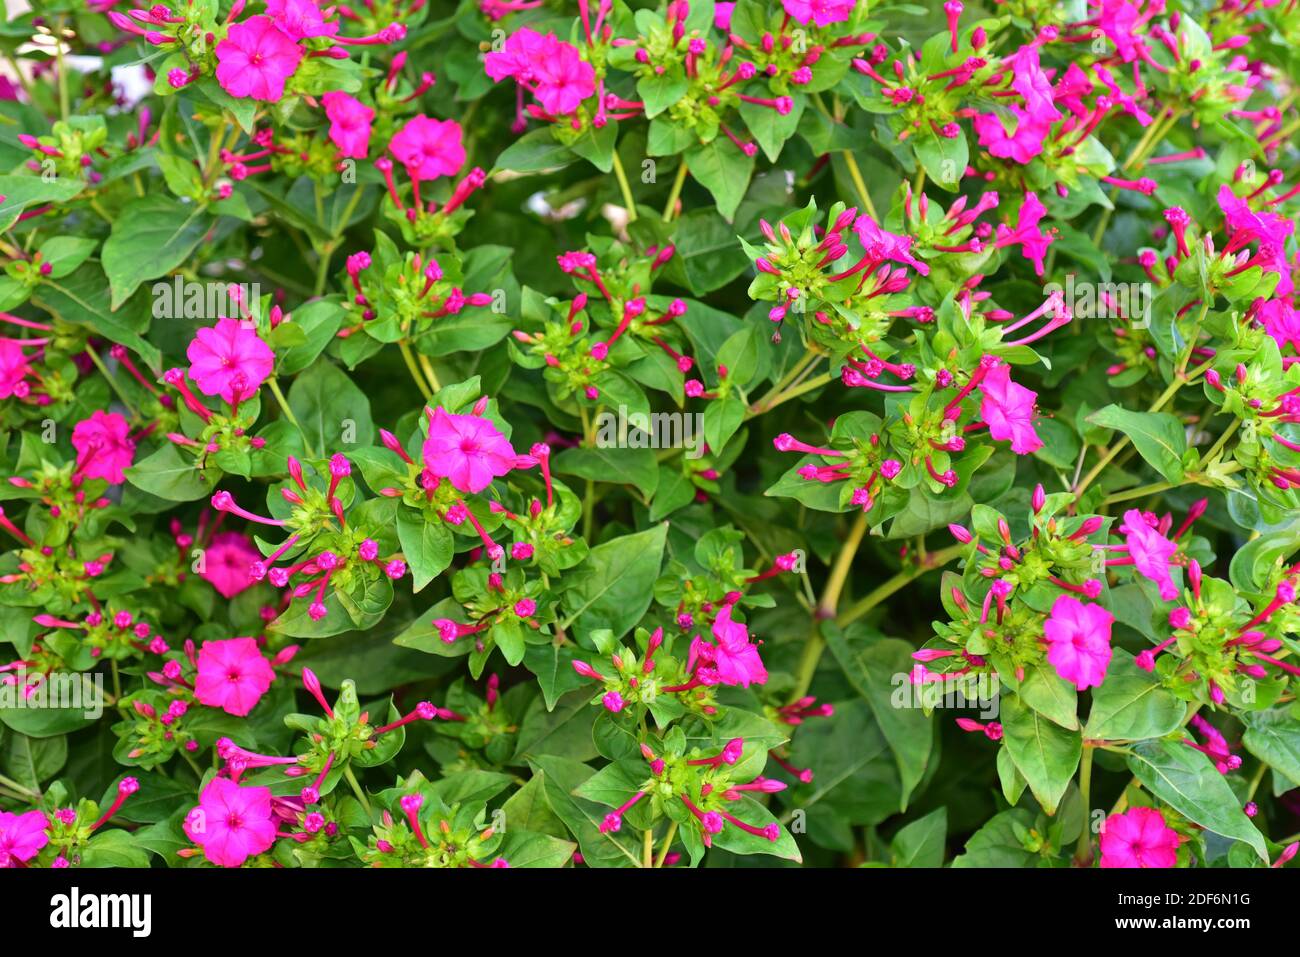 Marvel of Peru or four o'clock flower (Mirabilis jalapa) is a perennial plant with variegated flowers native to tropical South America. Stock Photo